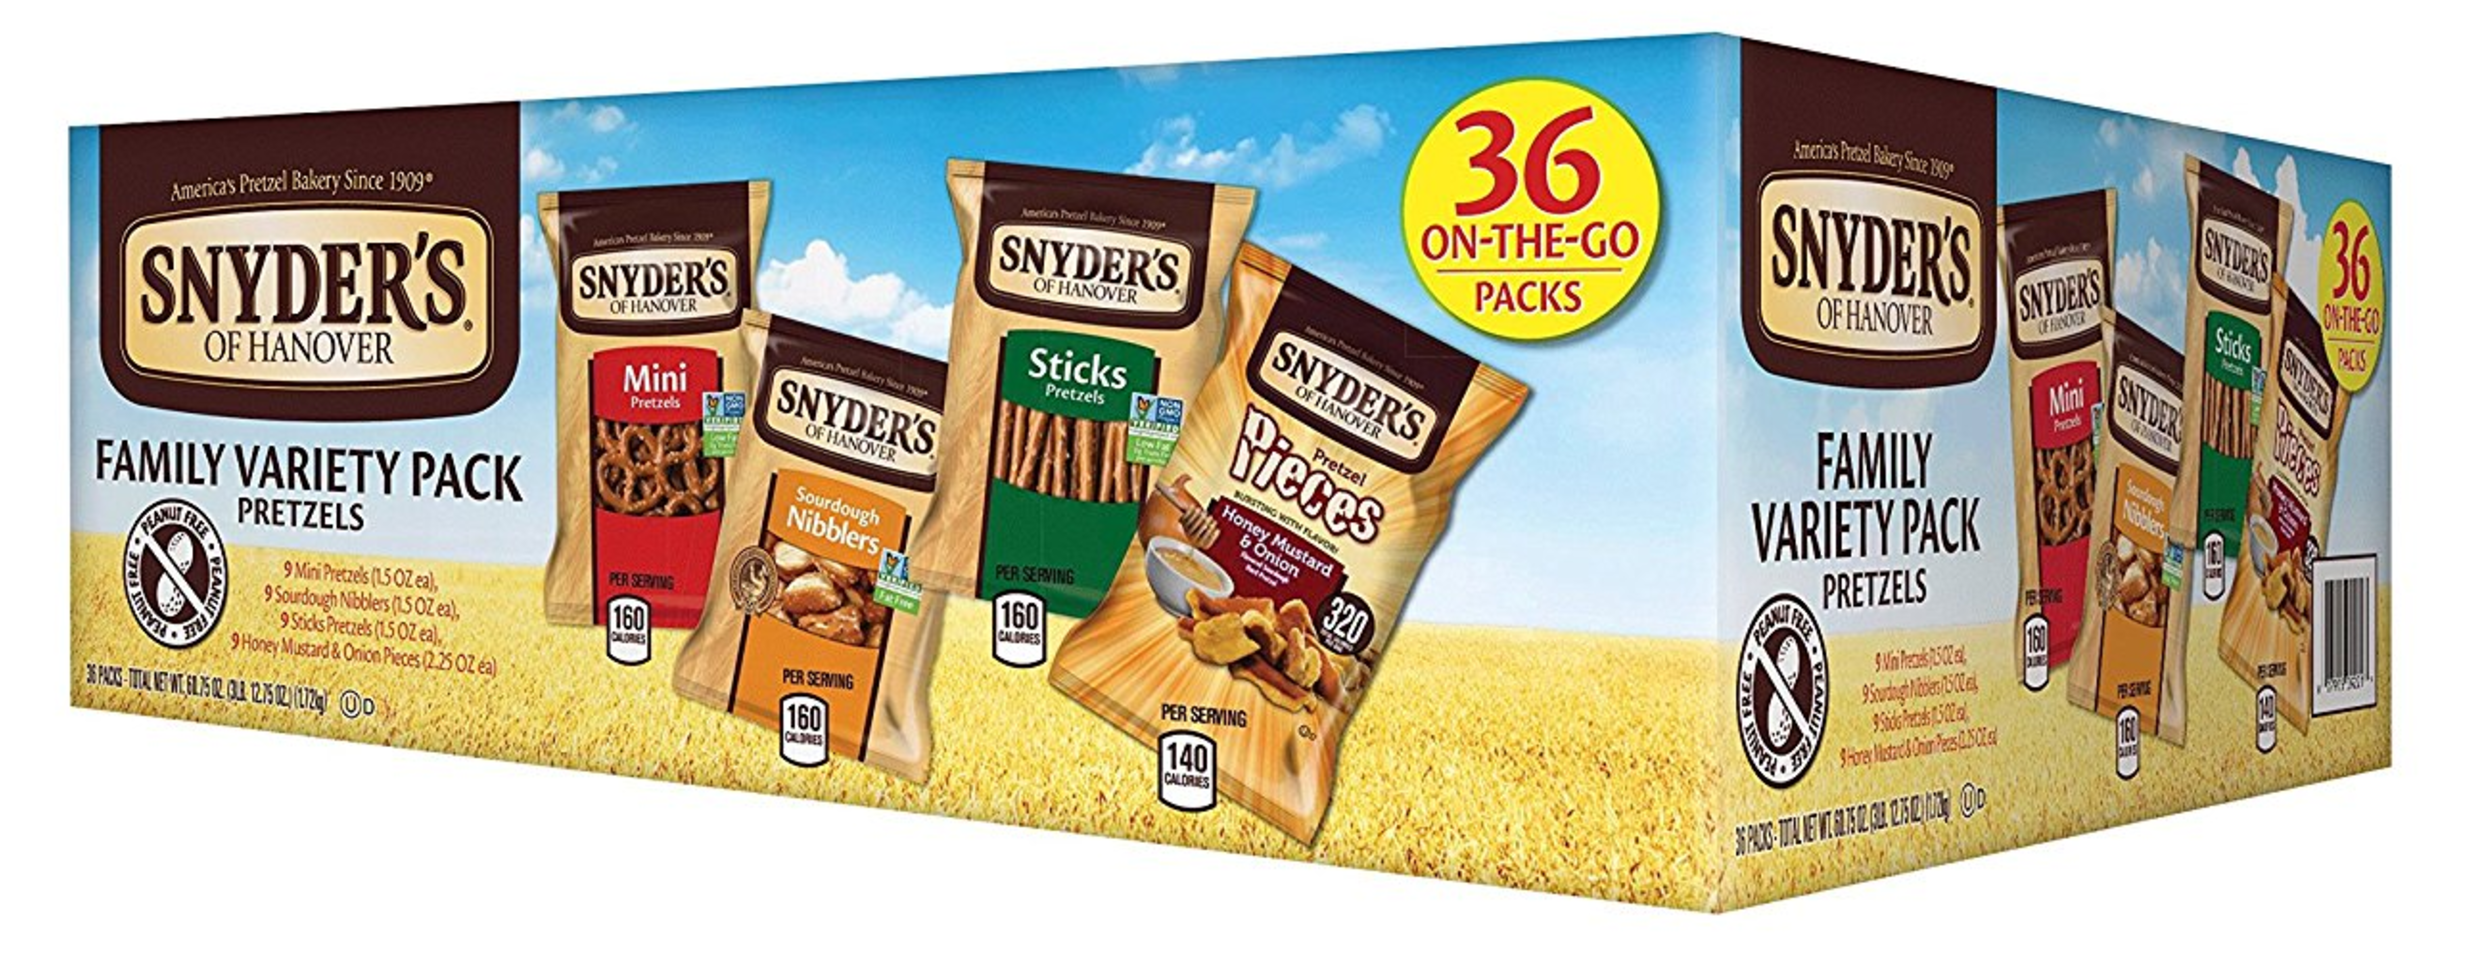 Snyder's of Hanover Pretzel Variety Pack, 36 Count as low as $7.13 shipped!